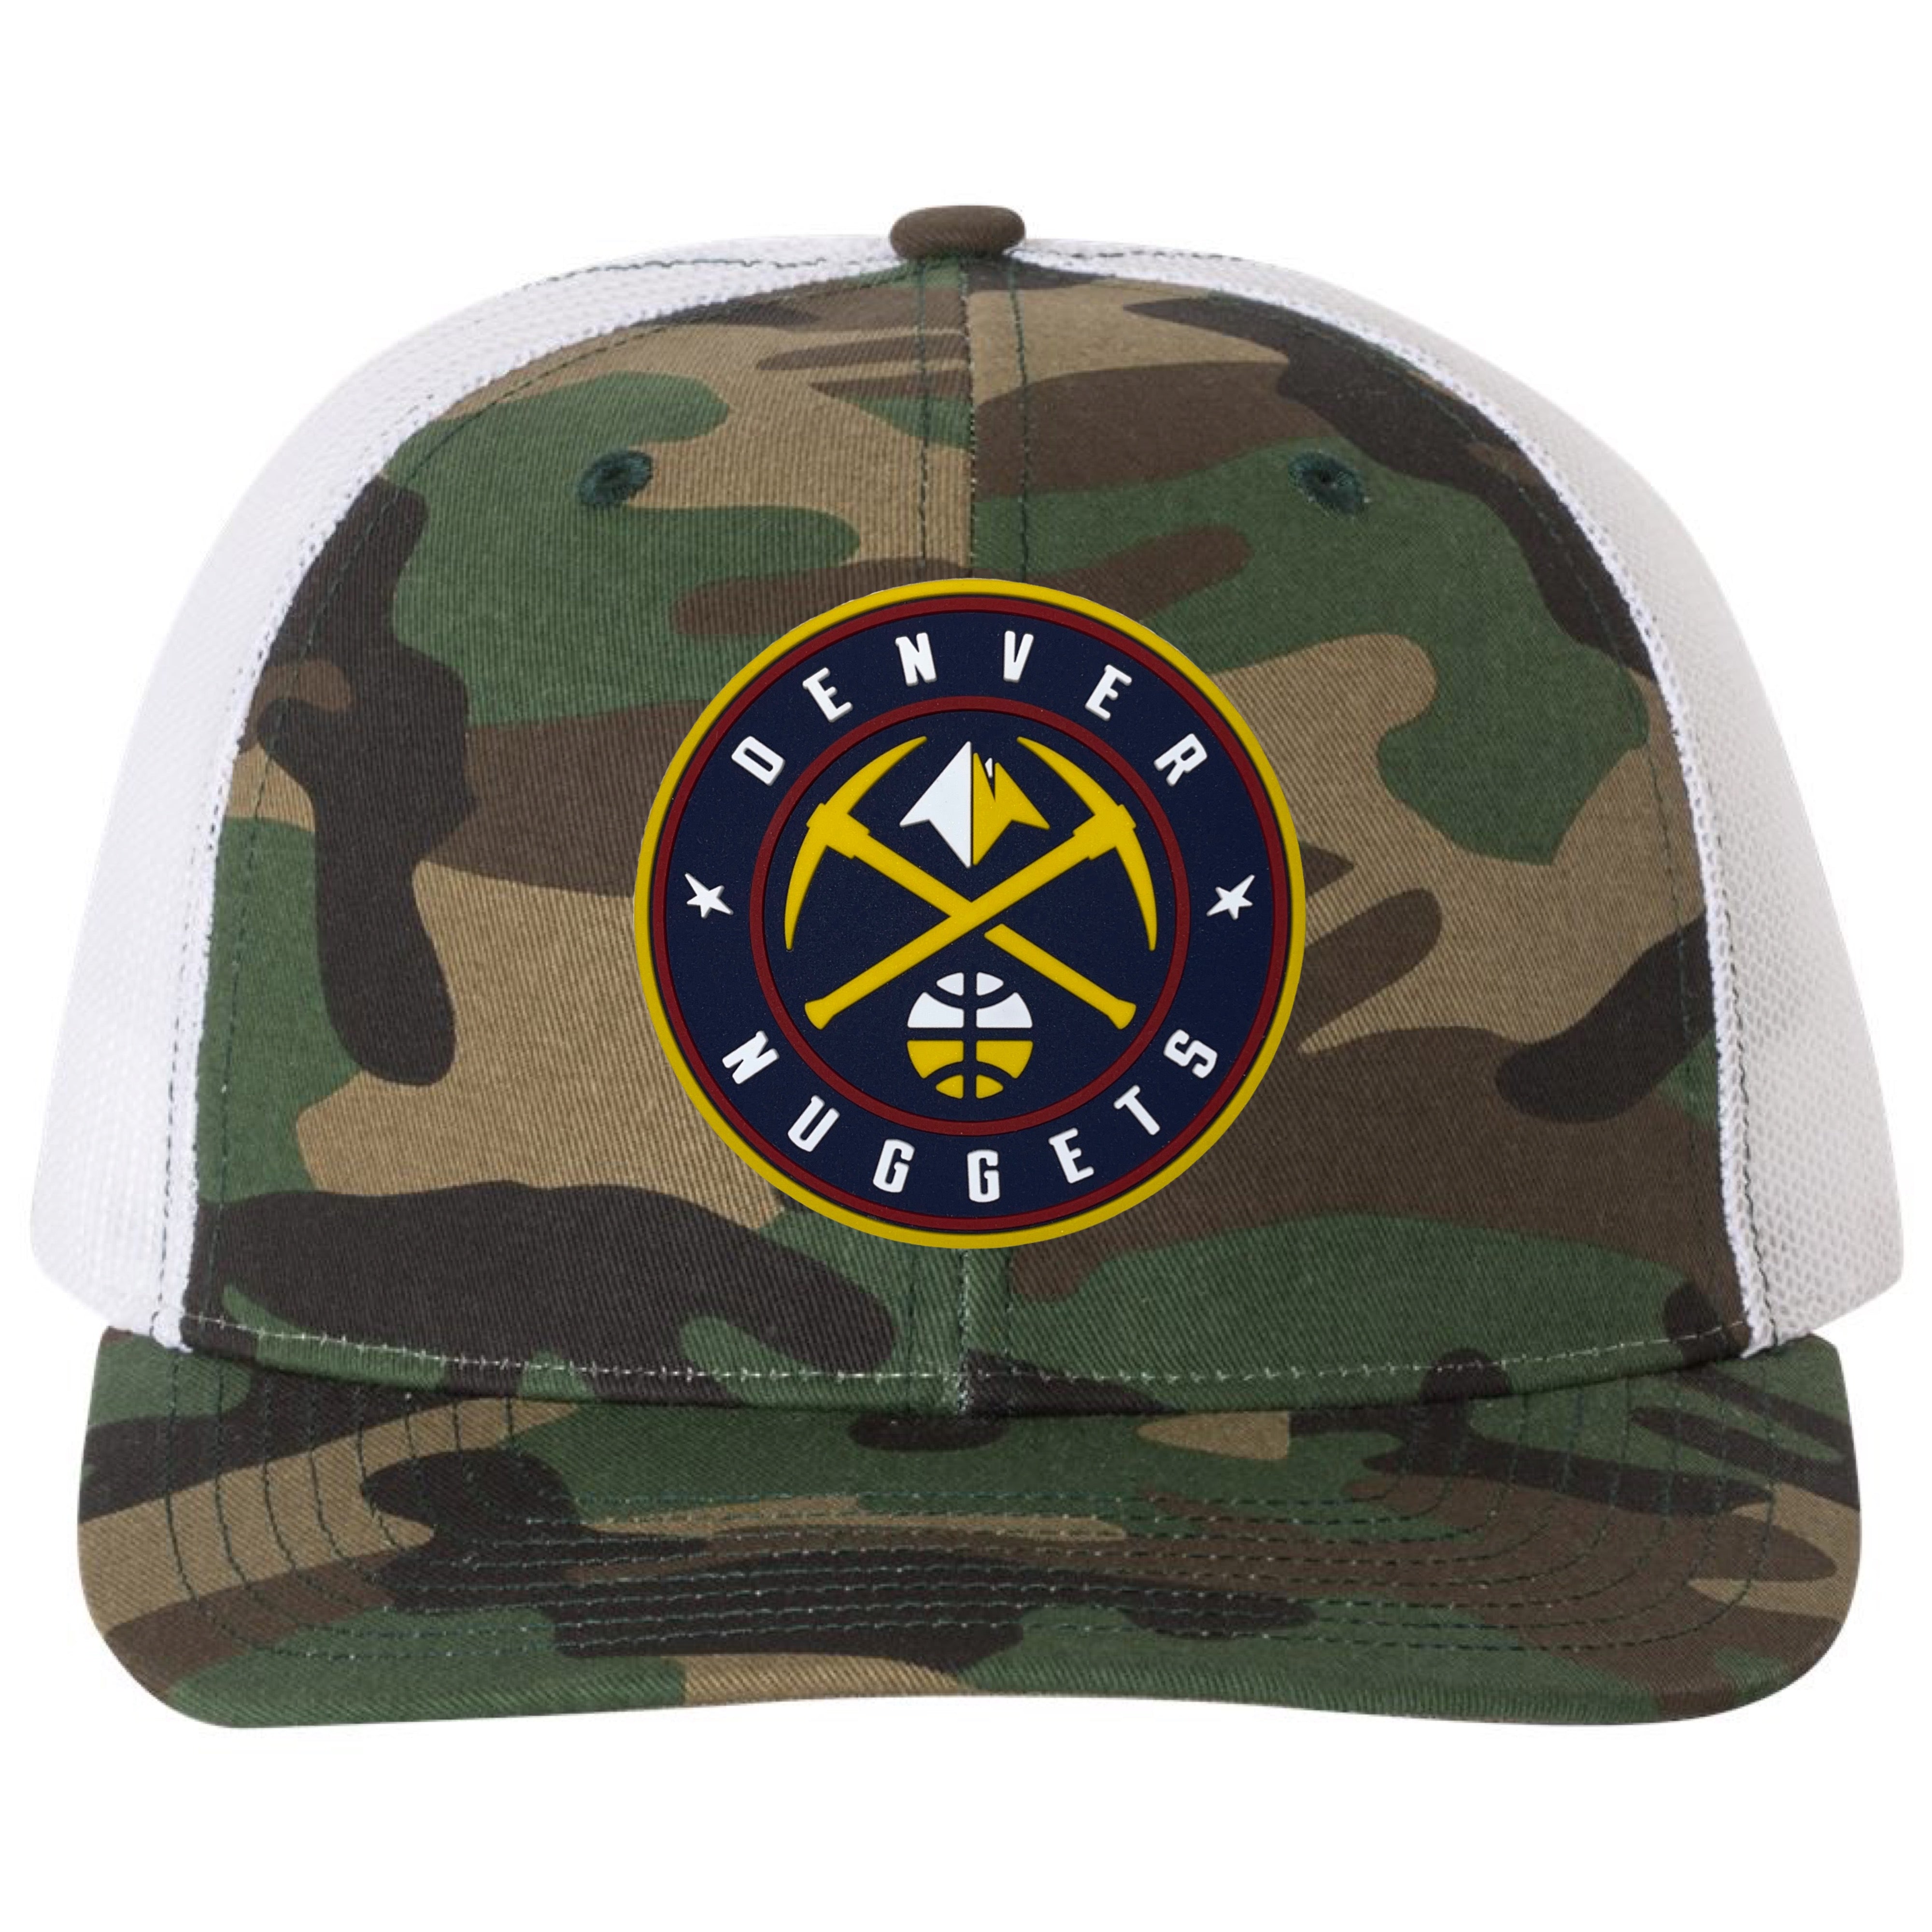 Denver Nuggets 3D Patterned Snapback Trucker Hat- Army Camo/ White